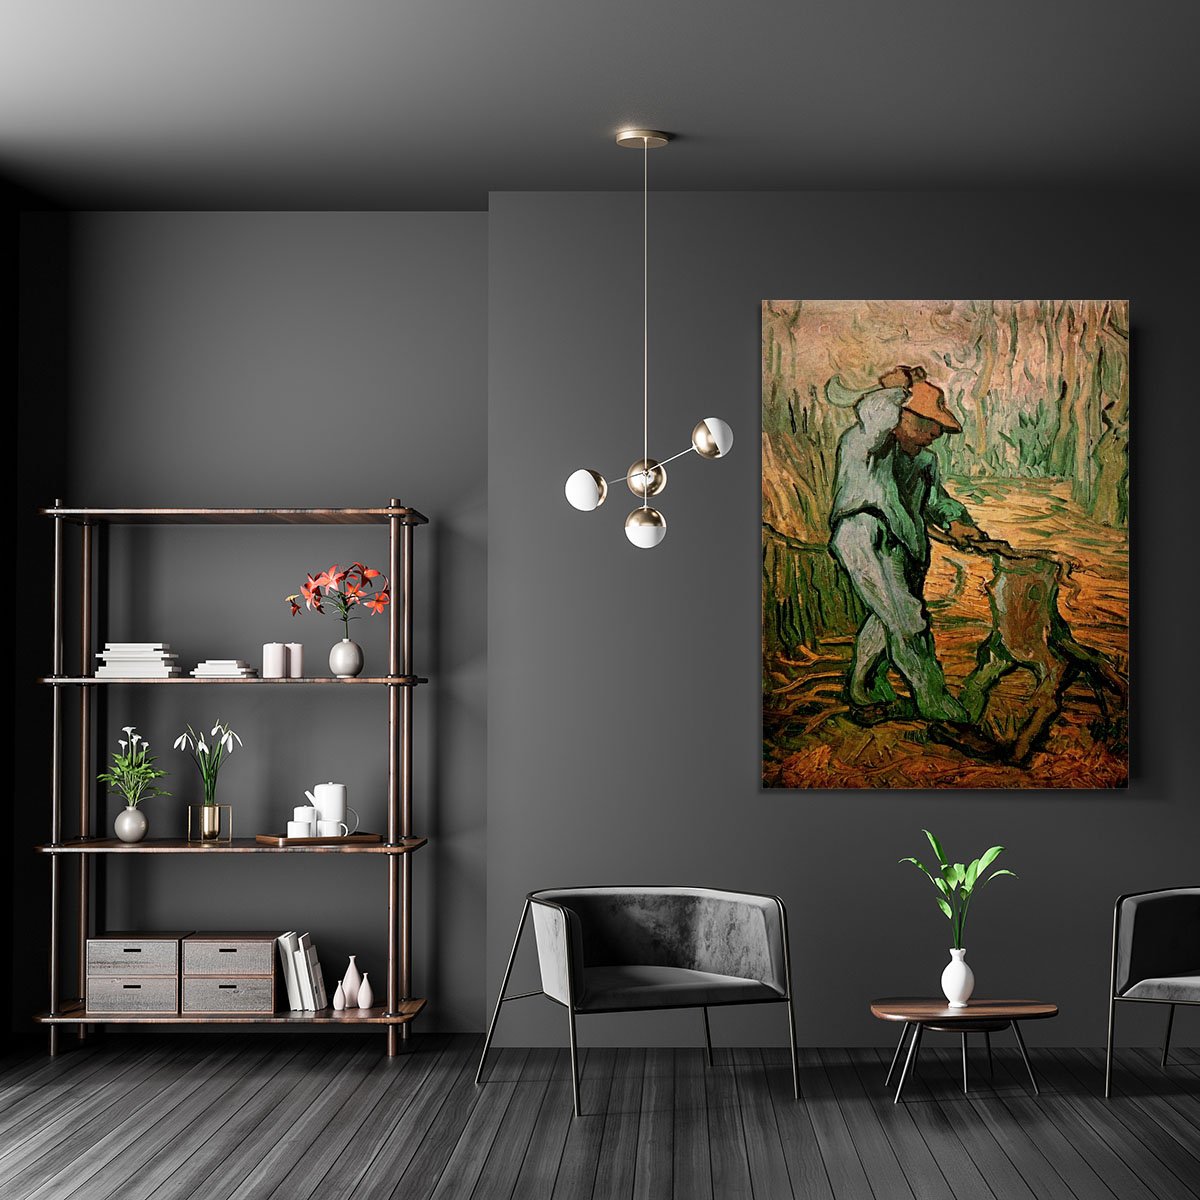 The Woodcutter after Millet by Van Gogh Canvas Print or Poster